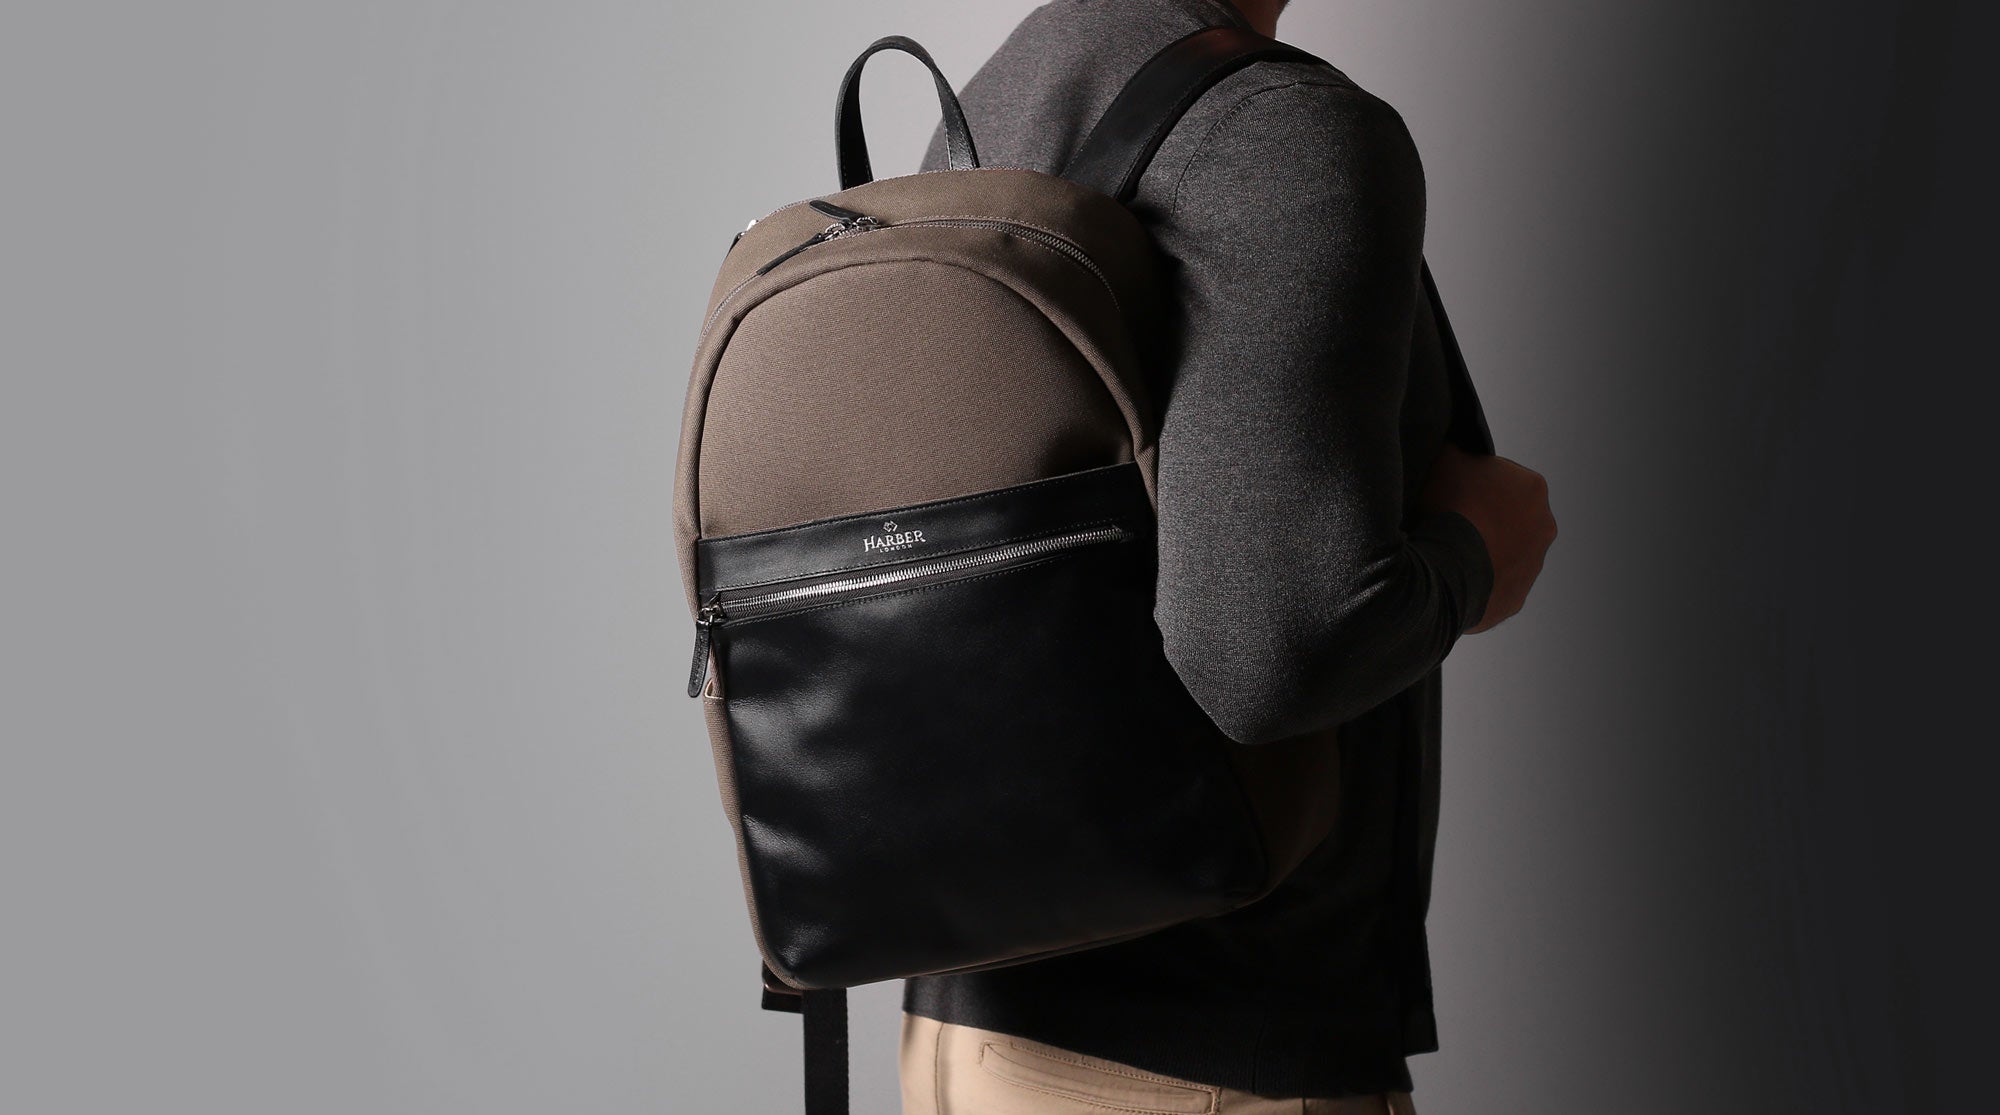 Office Backpack, Made From 100% Recycled Plastic Bottles